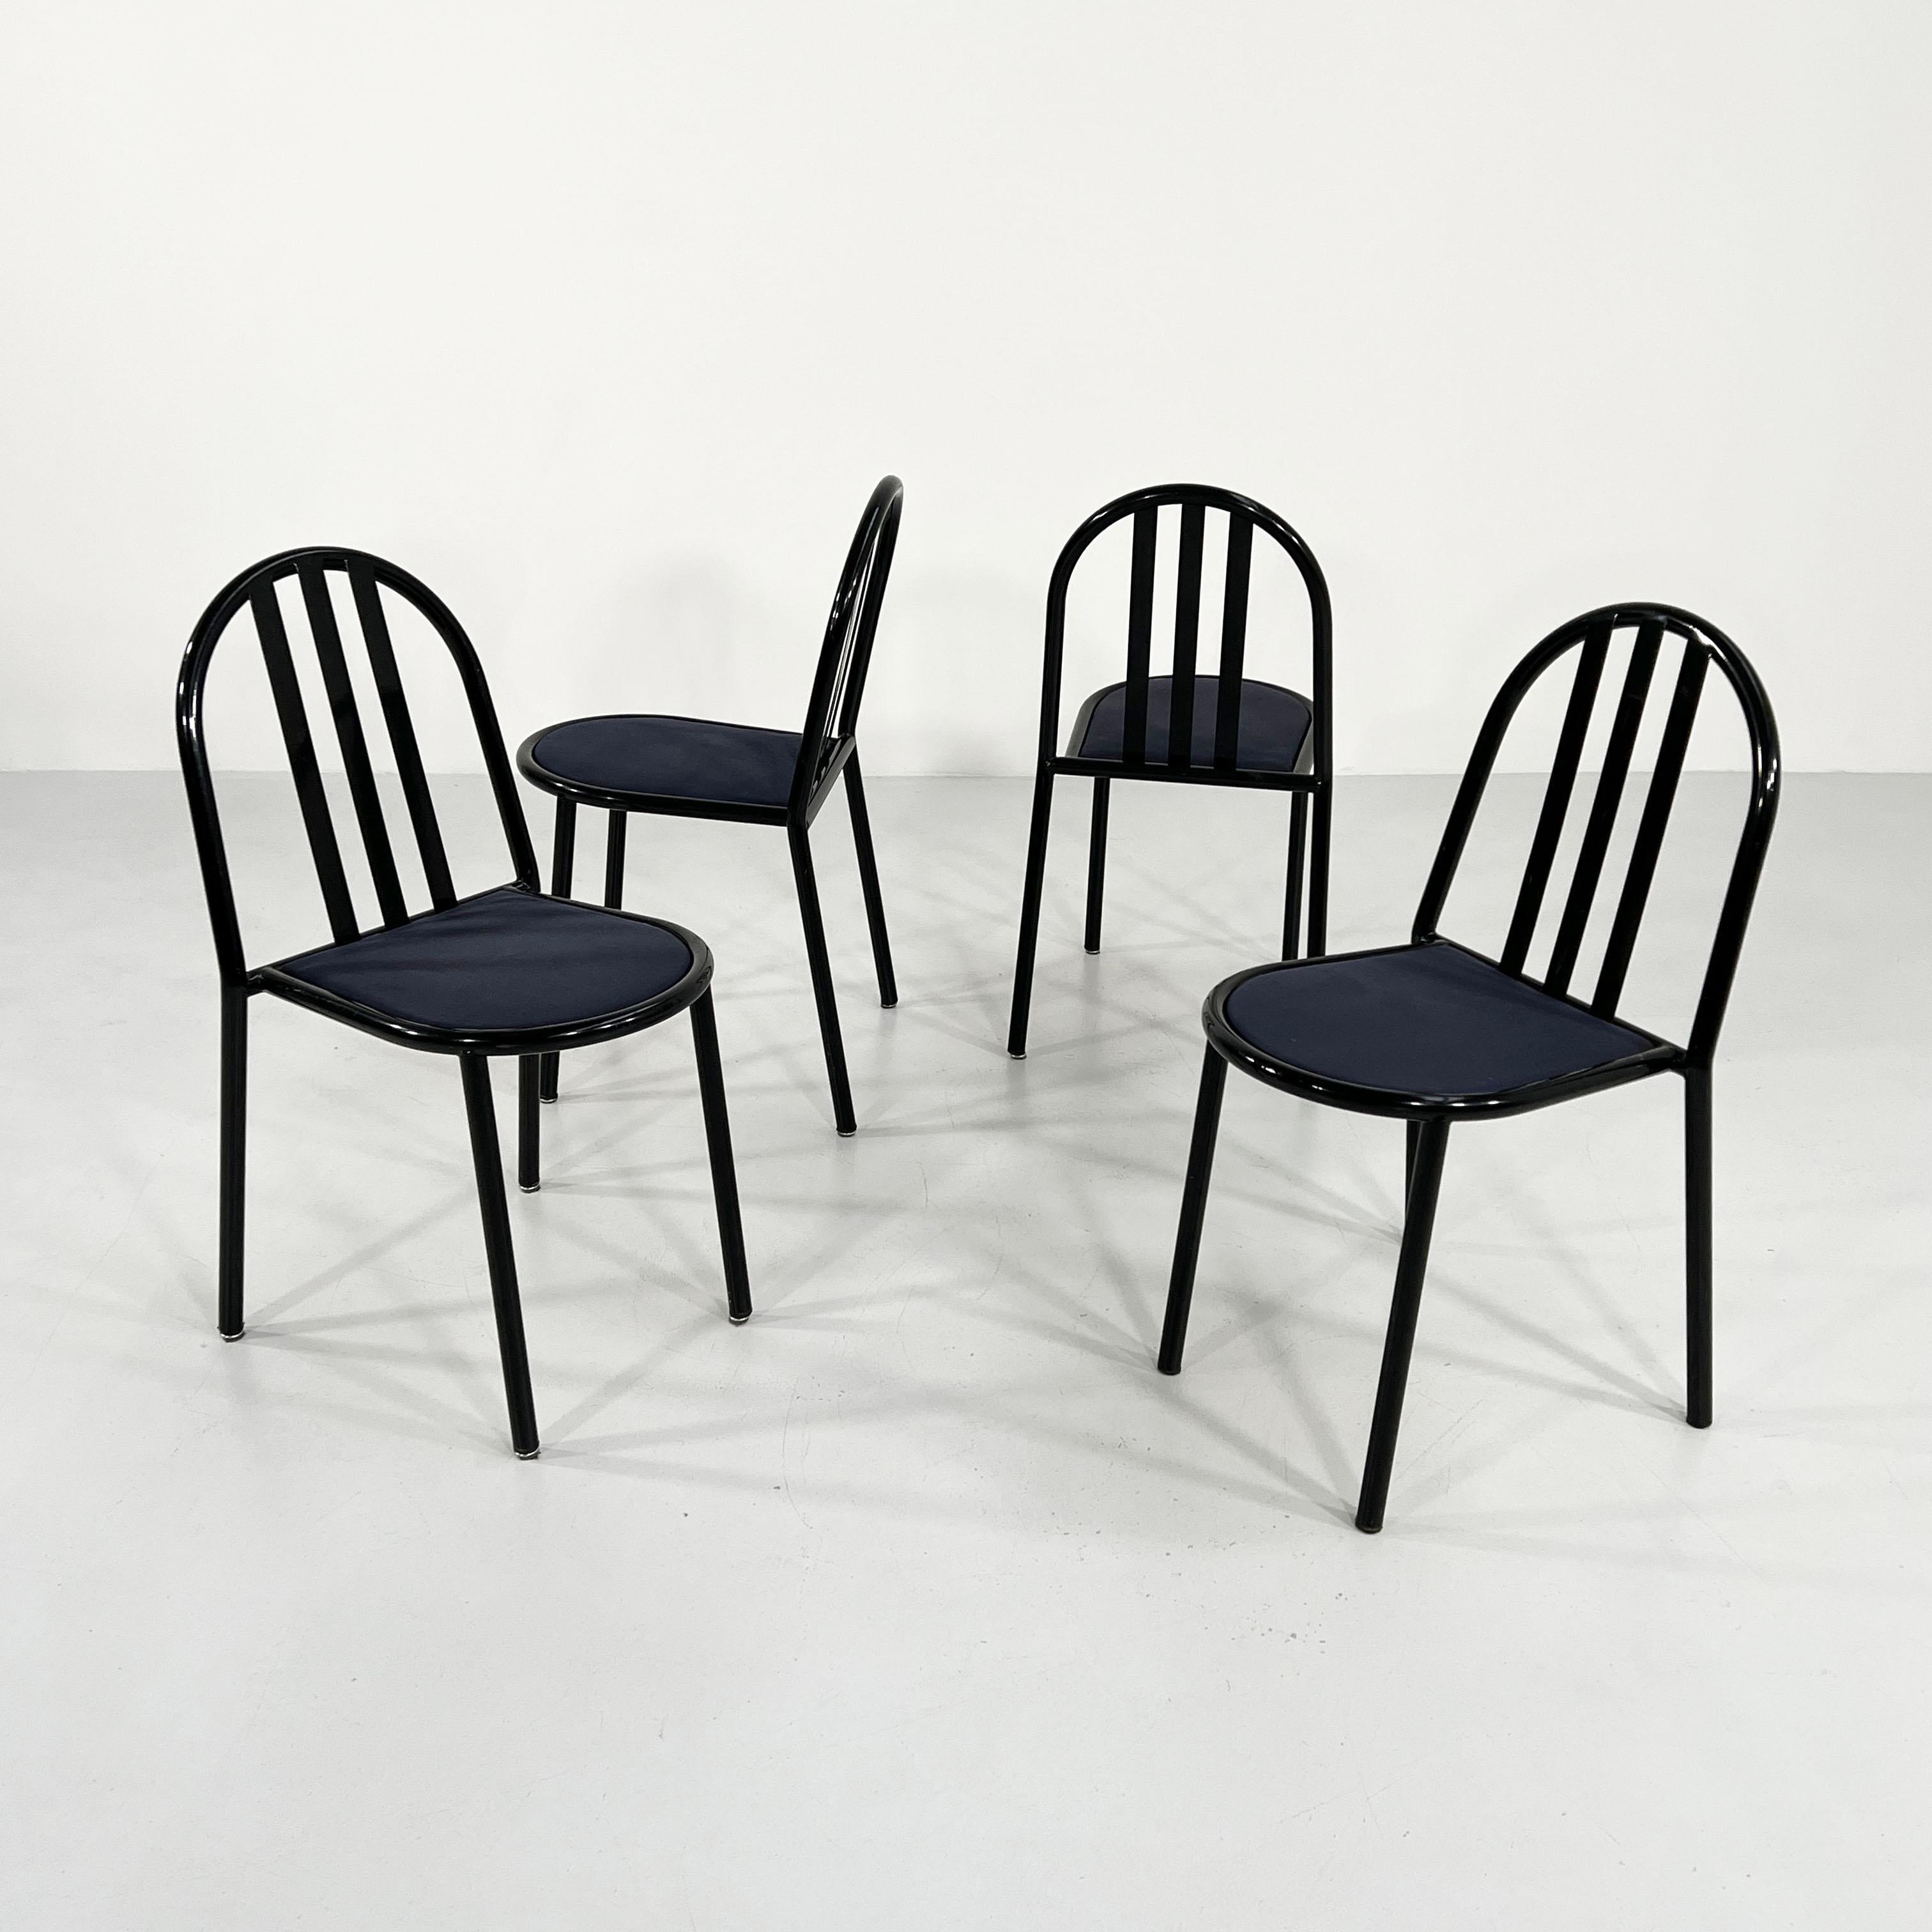 Price is for the set of 4 - 3 sets of 4 available (12 chairs total)
Designer - Robert Mallet-Stevens
Producer -Pallucco Italia
Model - No.222 Chairs 
Design Period - Eighties
Measurements - width 40 cm x depth 40 cm x height 82 cm x seat height